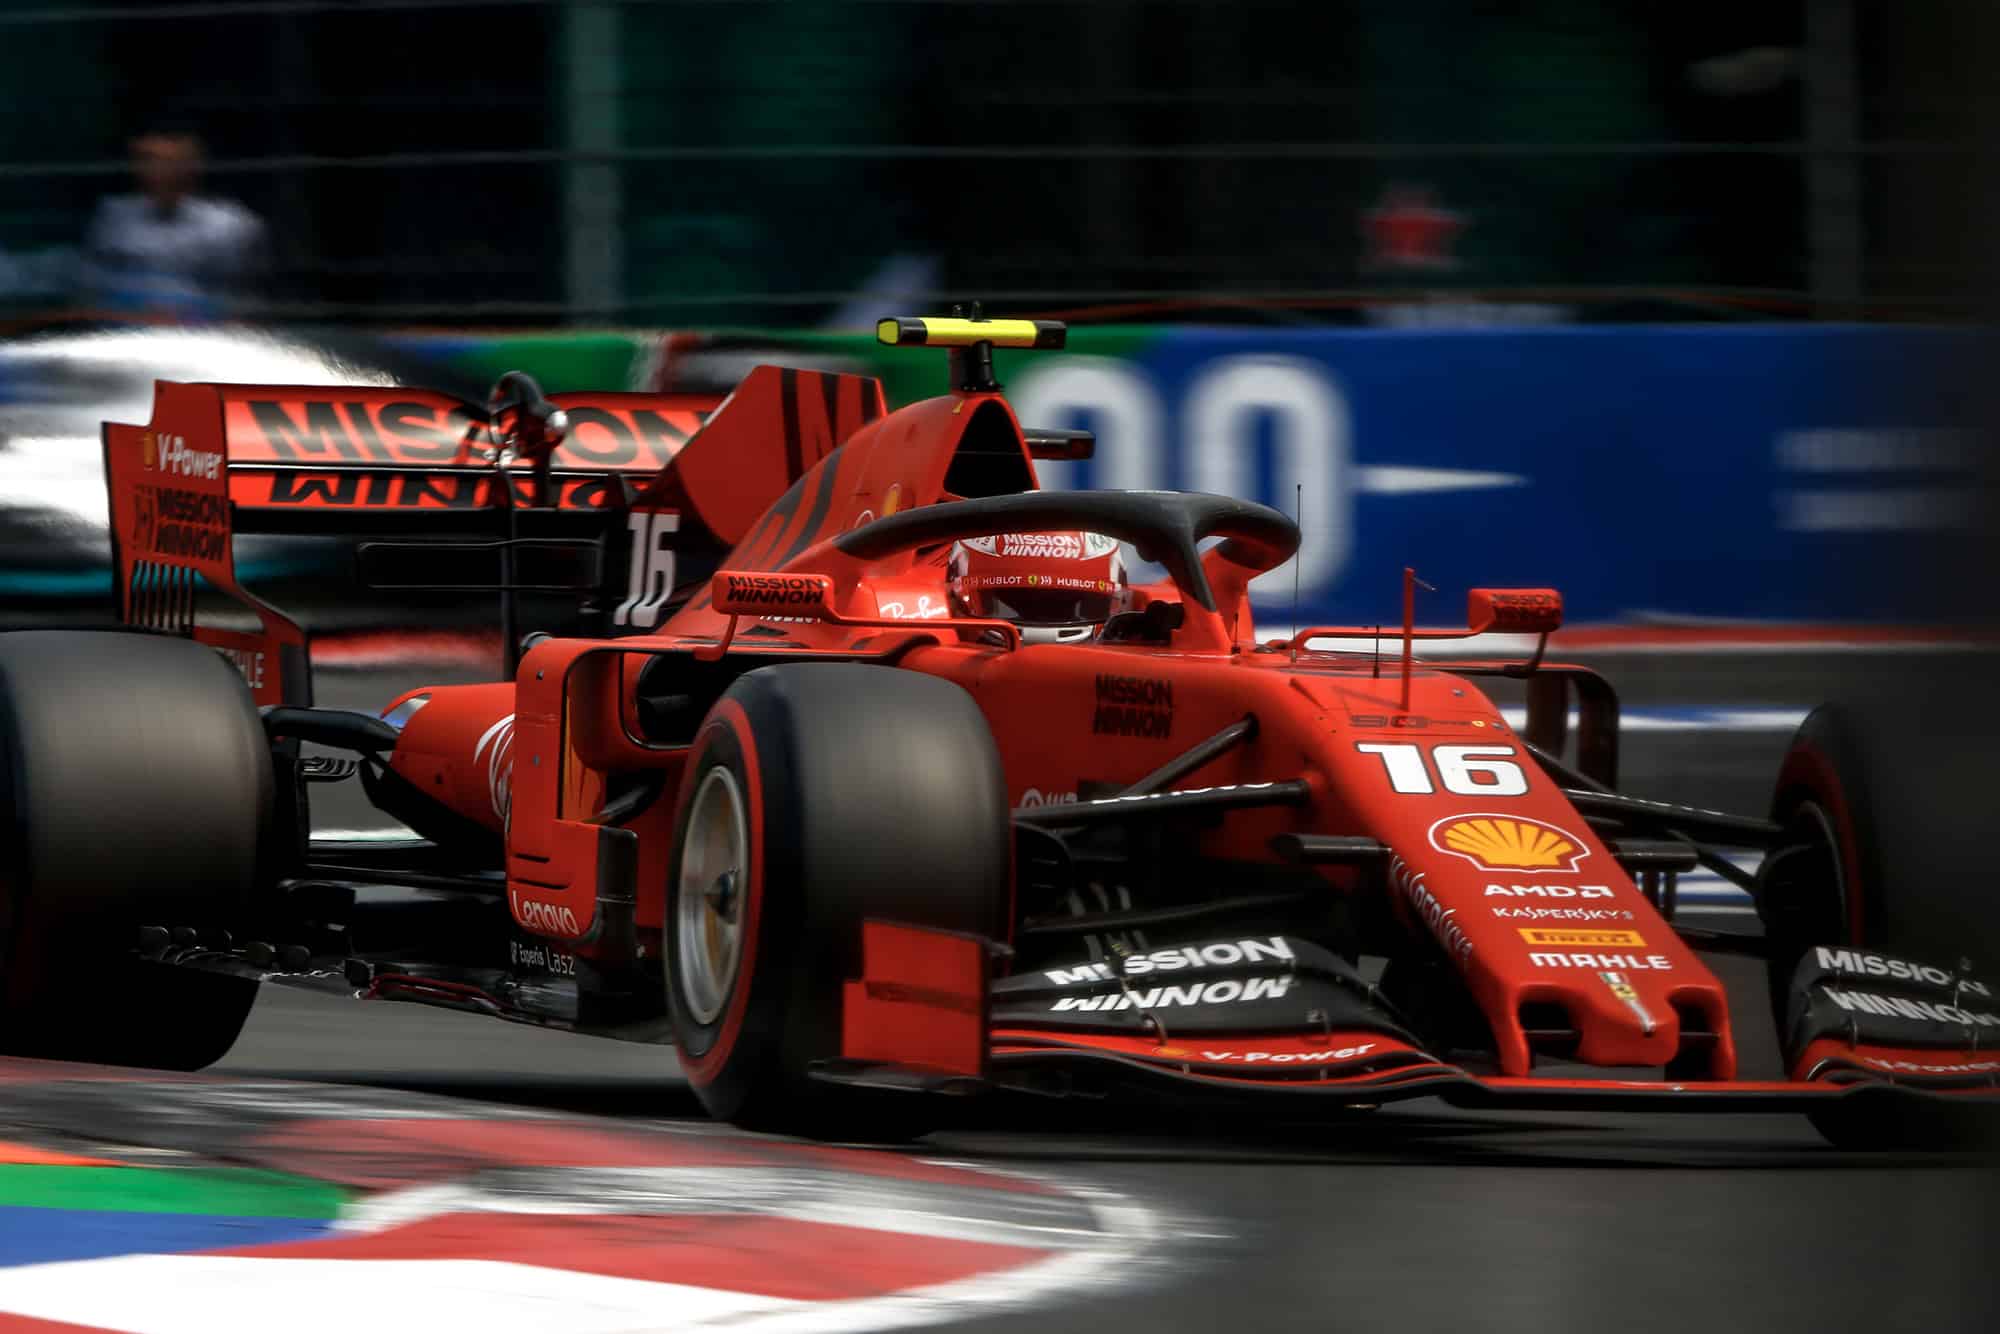 Charles Leclerc during qualifying for the 2019 F1 Mexican Grand Prix